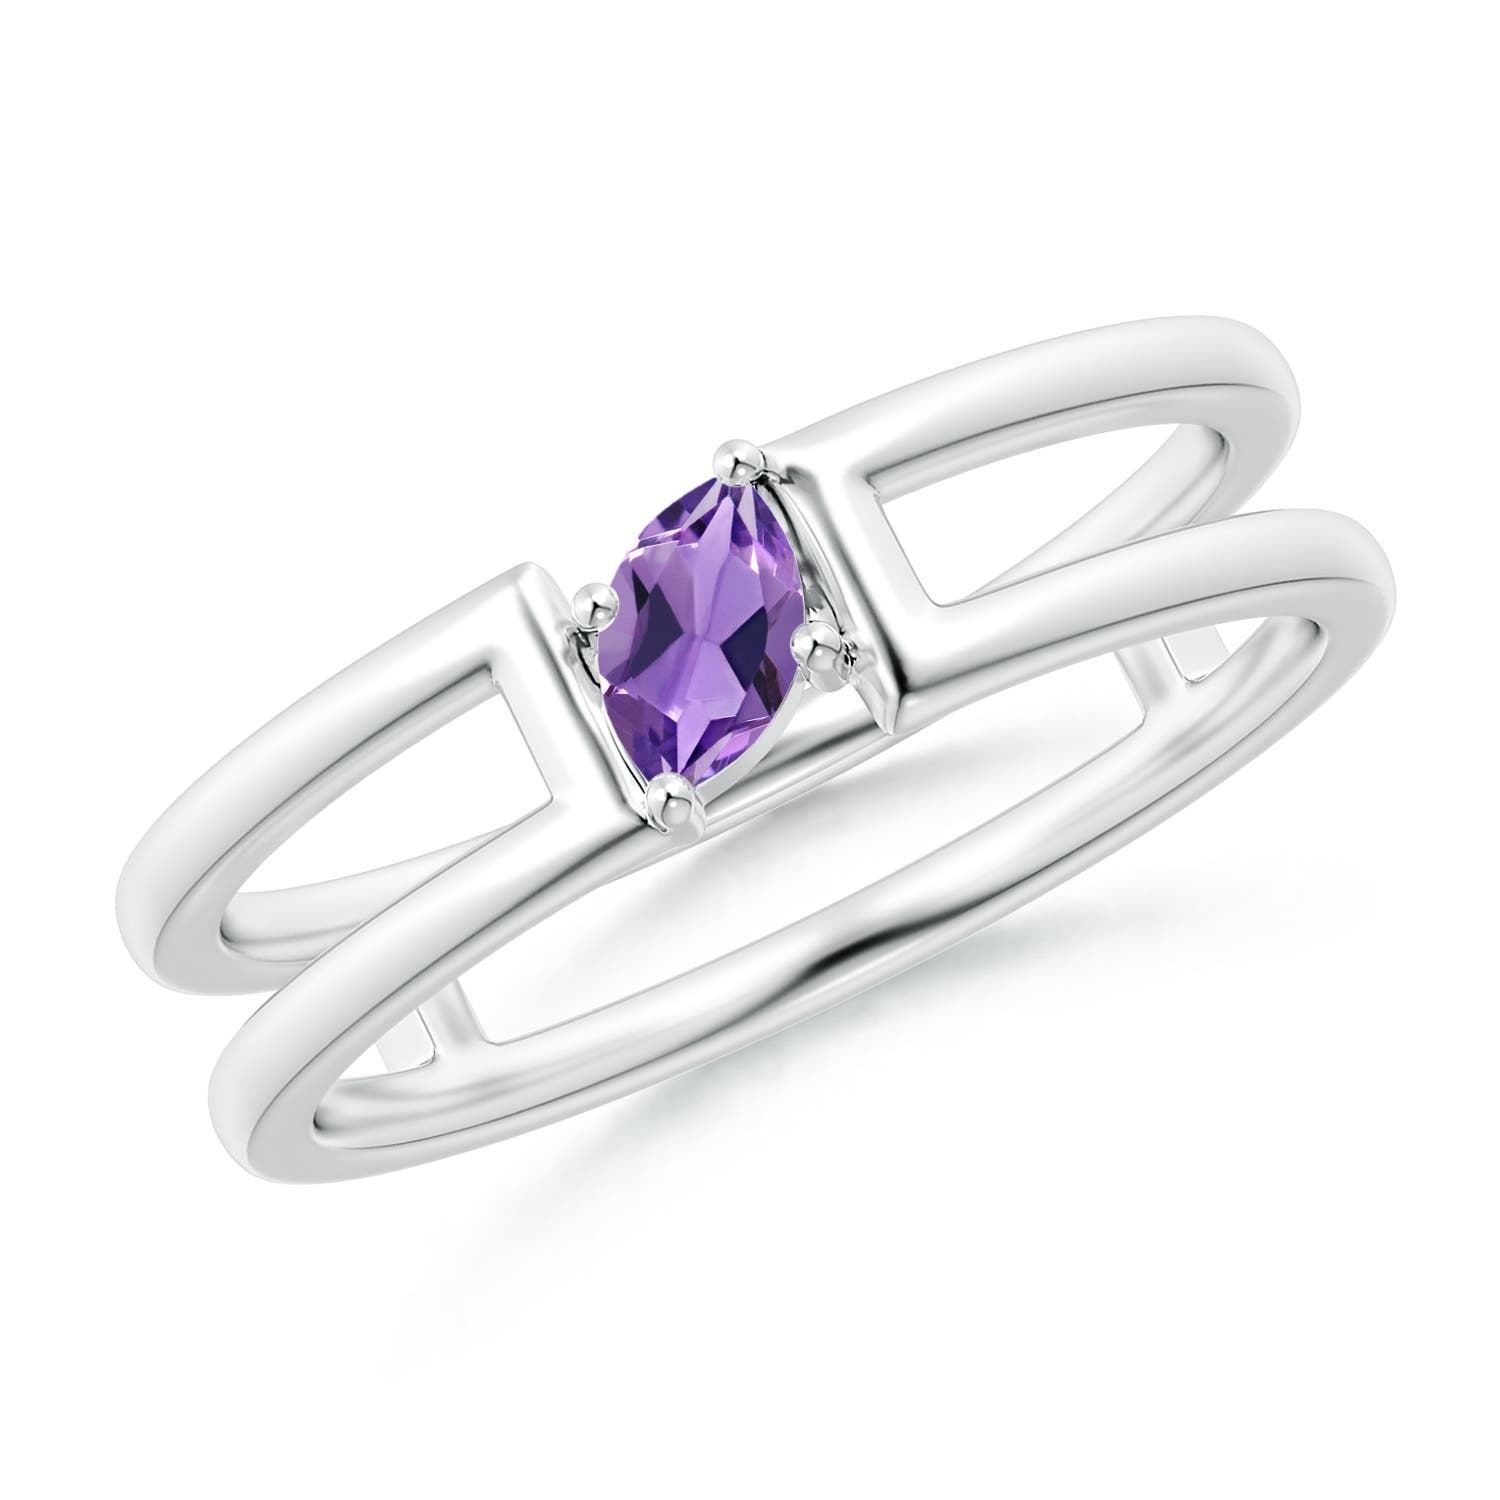 AA - Amethyst / 0.13 CT / 14 KT White Gold